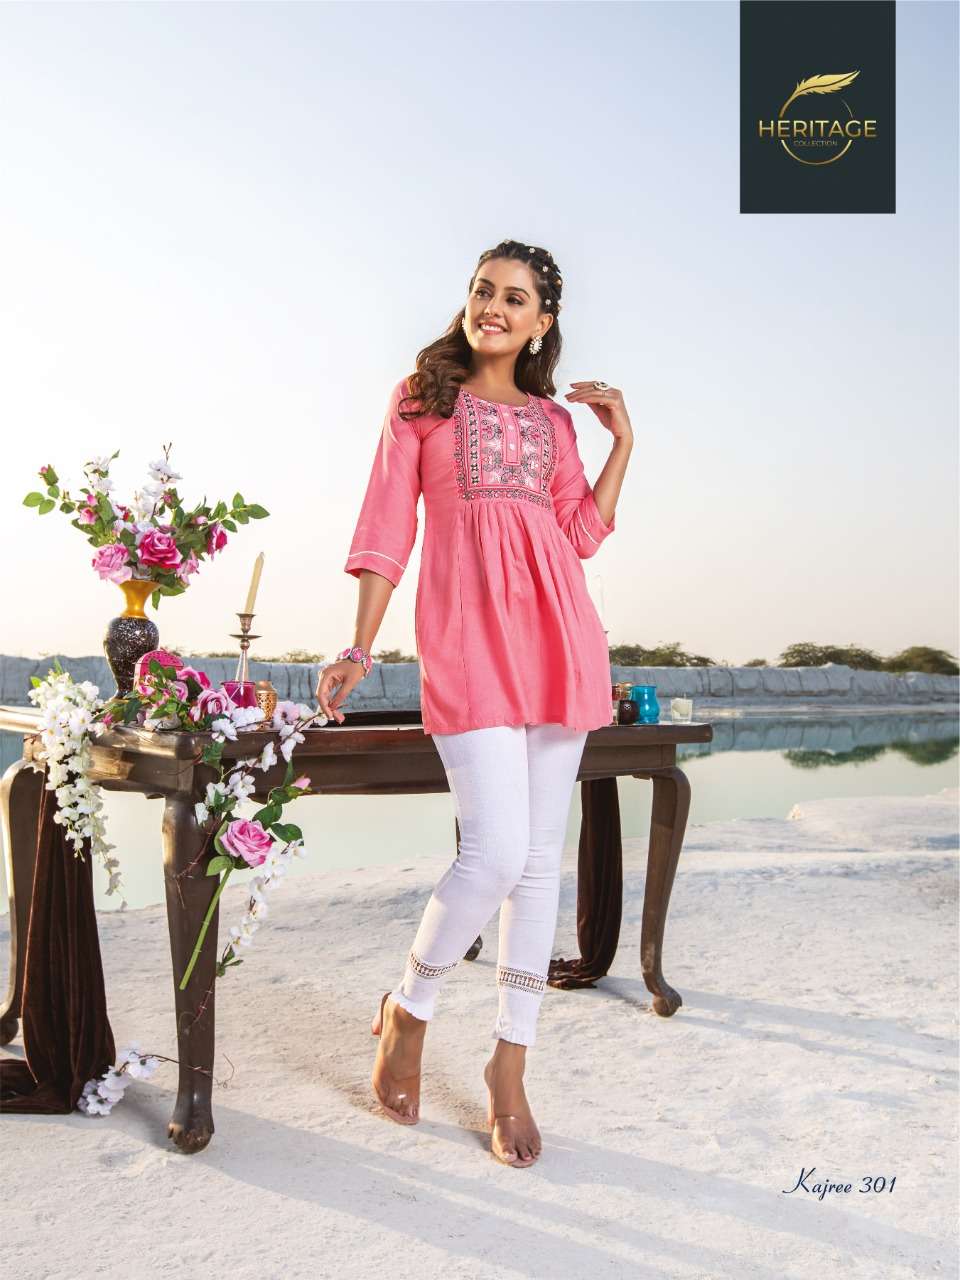 HERITAGE COLLECTION PRESENTS DESIGNER TUNICS WITH CONCEPT EMBROIDERY